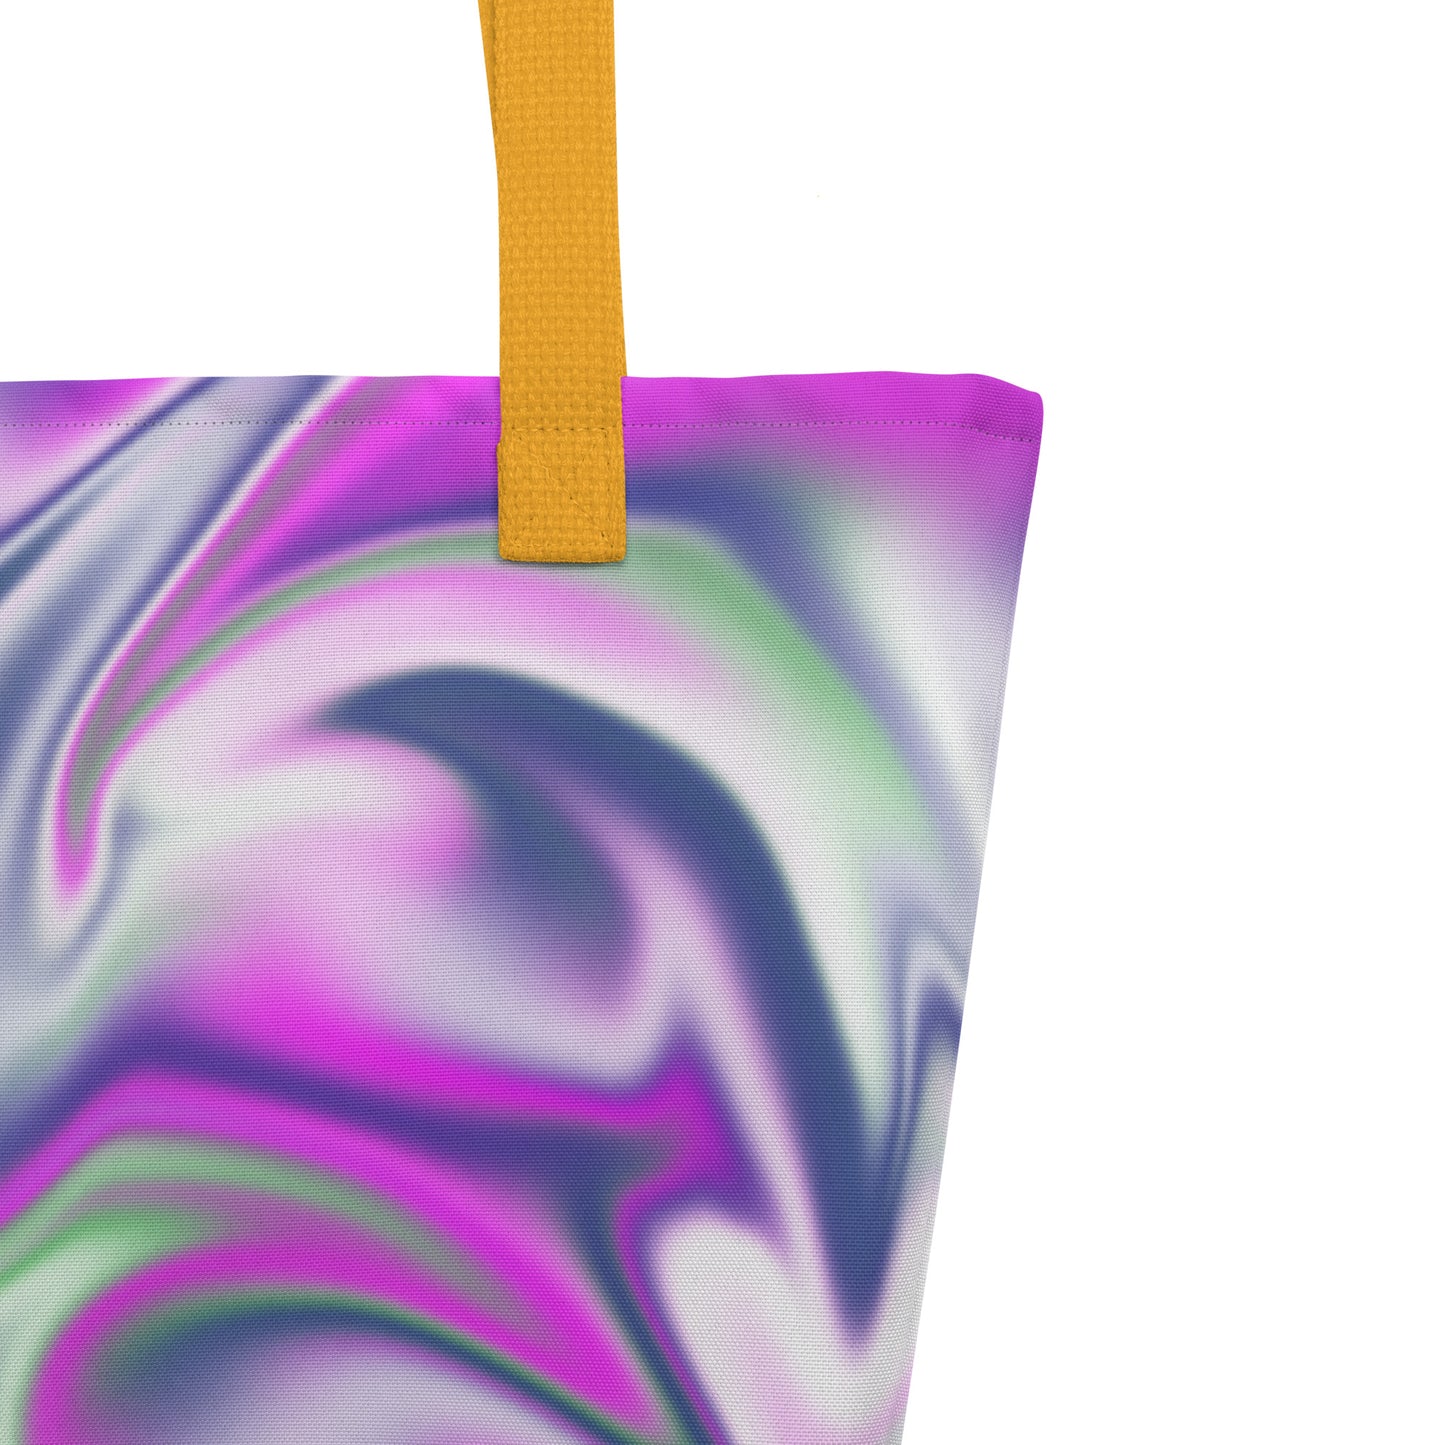 Burst BeSculpt Abstract Art Tote/Beach Bag Reflected Pattern Reversed Image